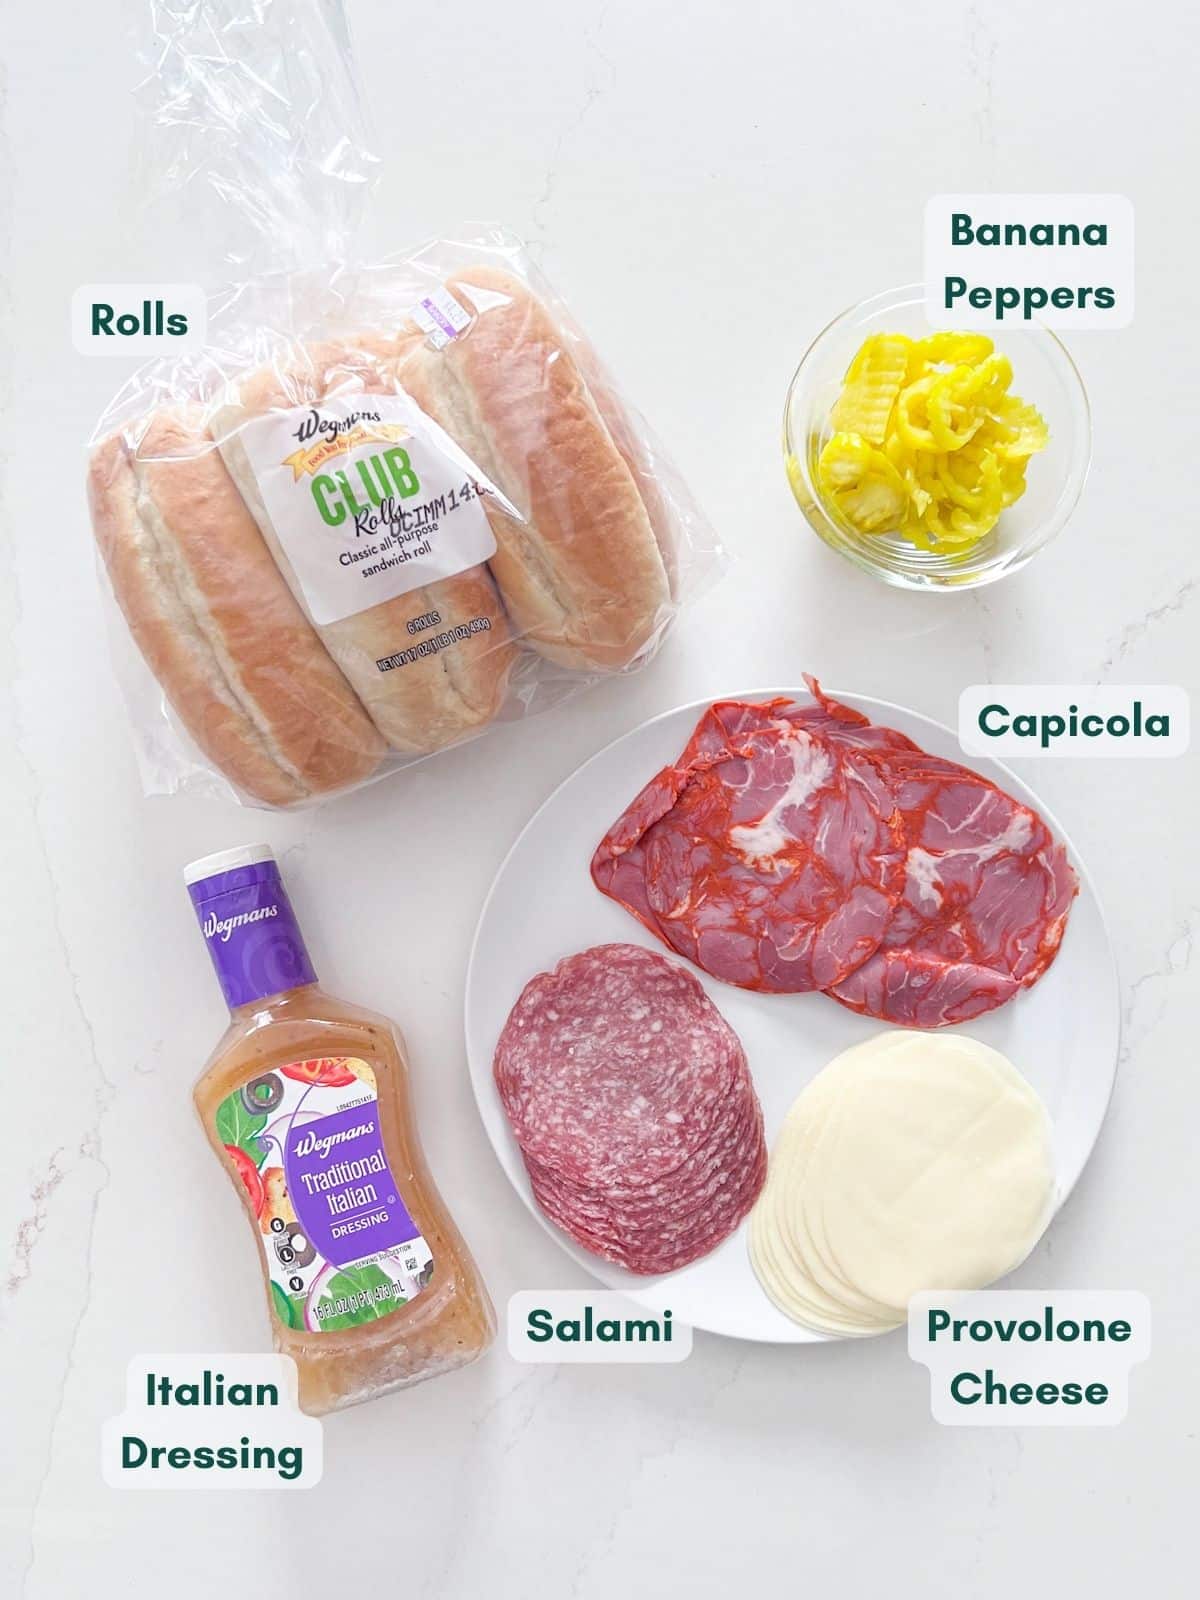 An overhead image of the sandwich ingredients labeled.